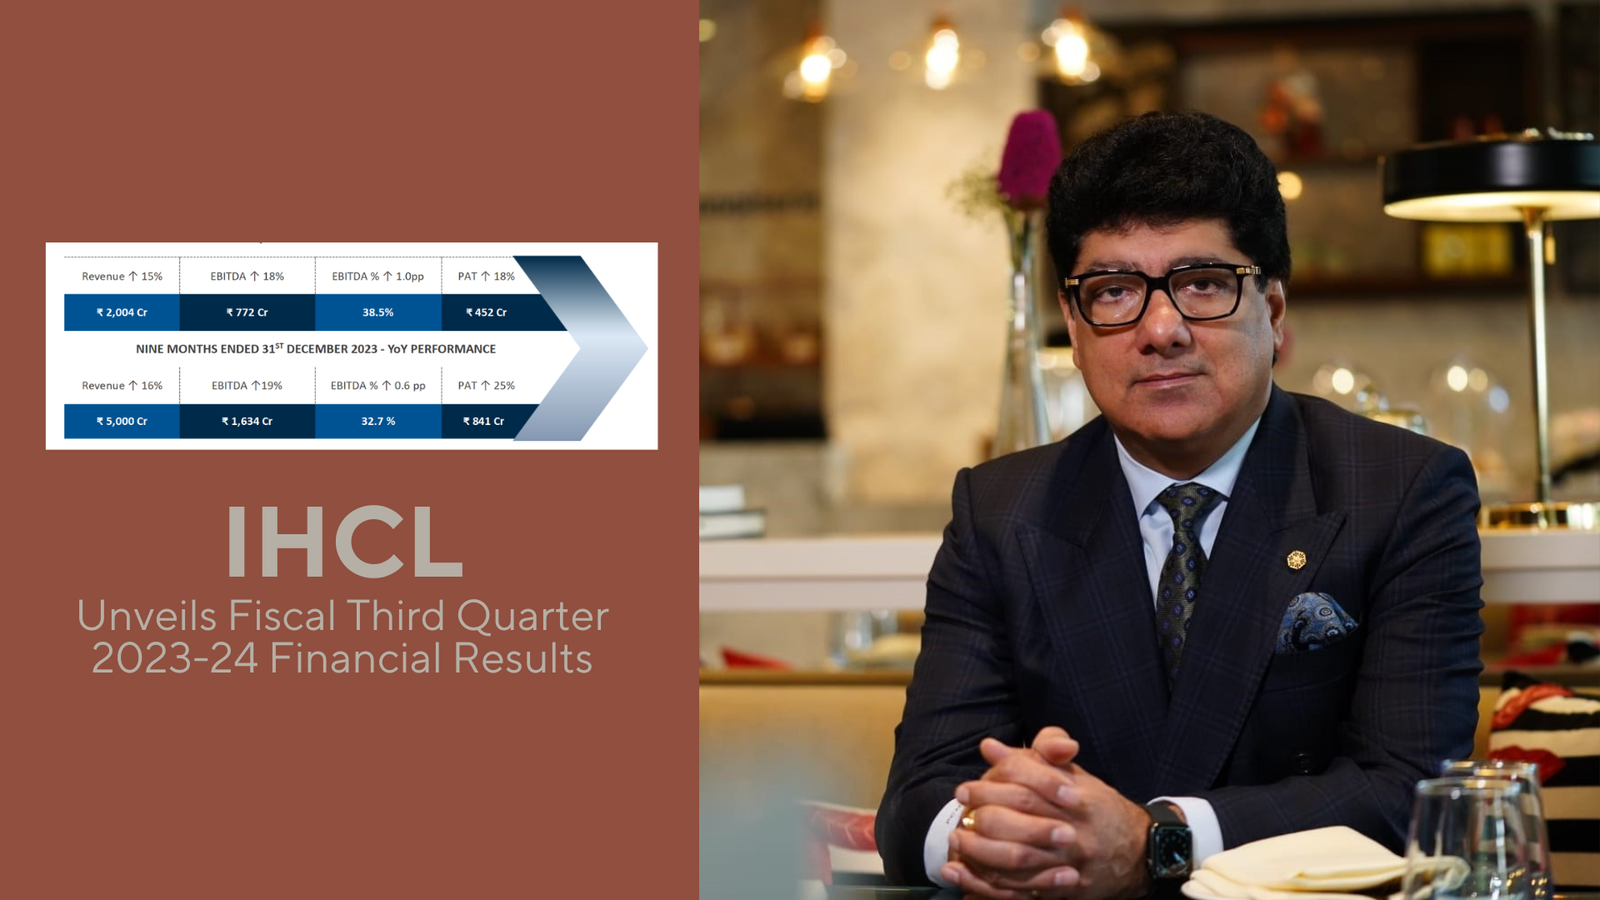 IHCL Unveils Fiscal Third Quarter 2023-24 Financial Results